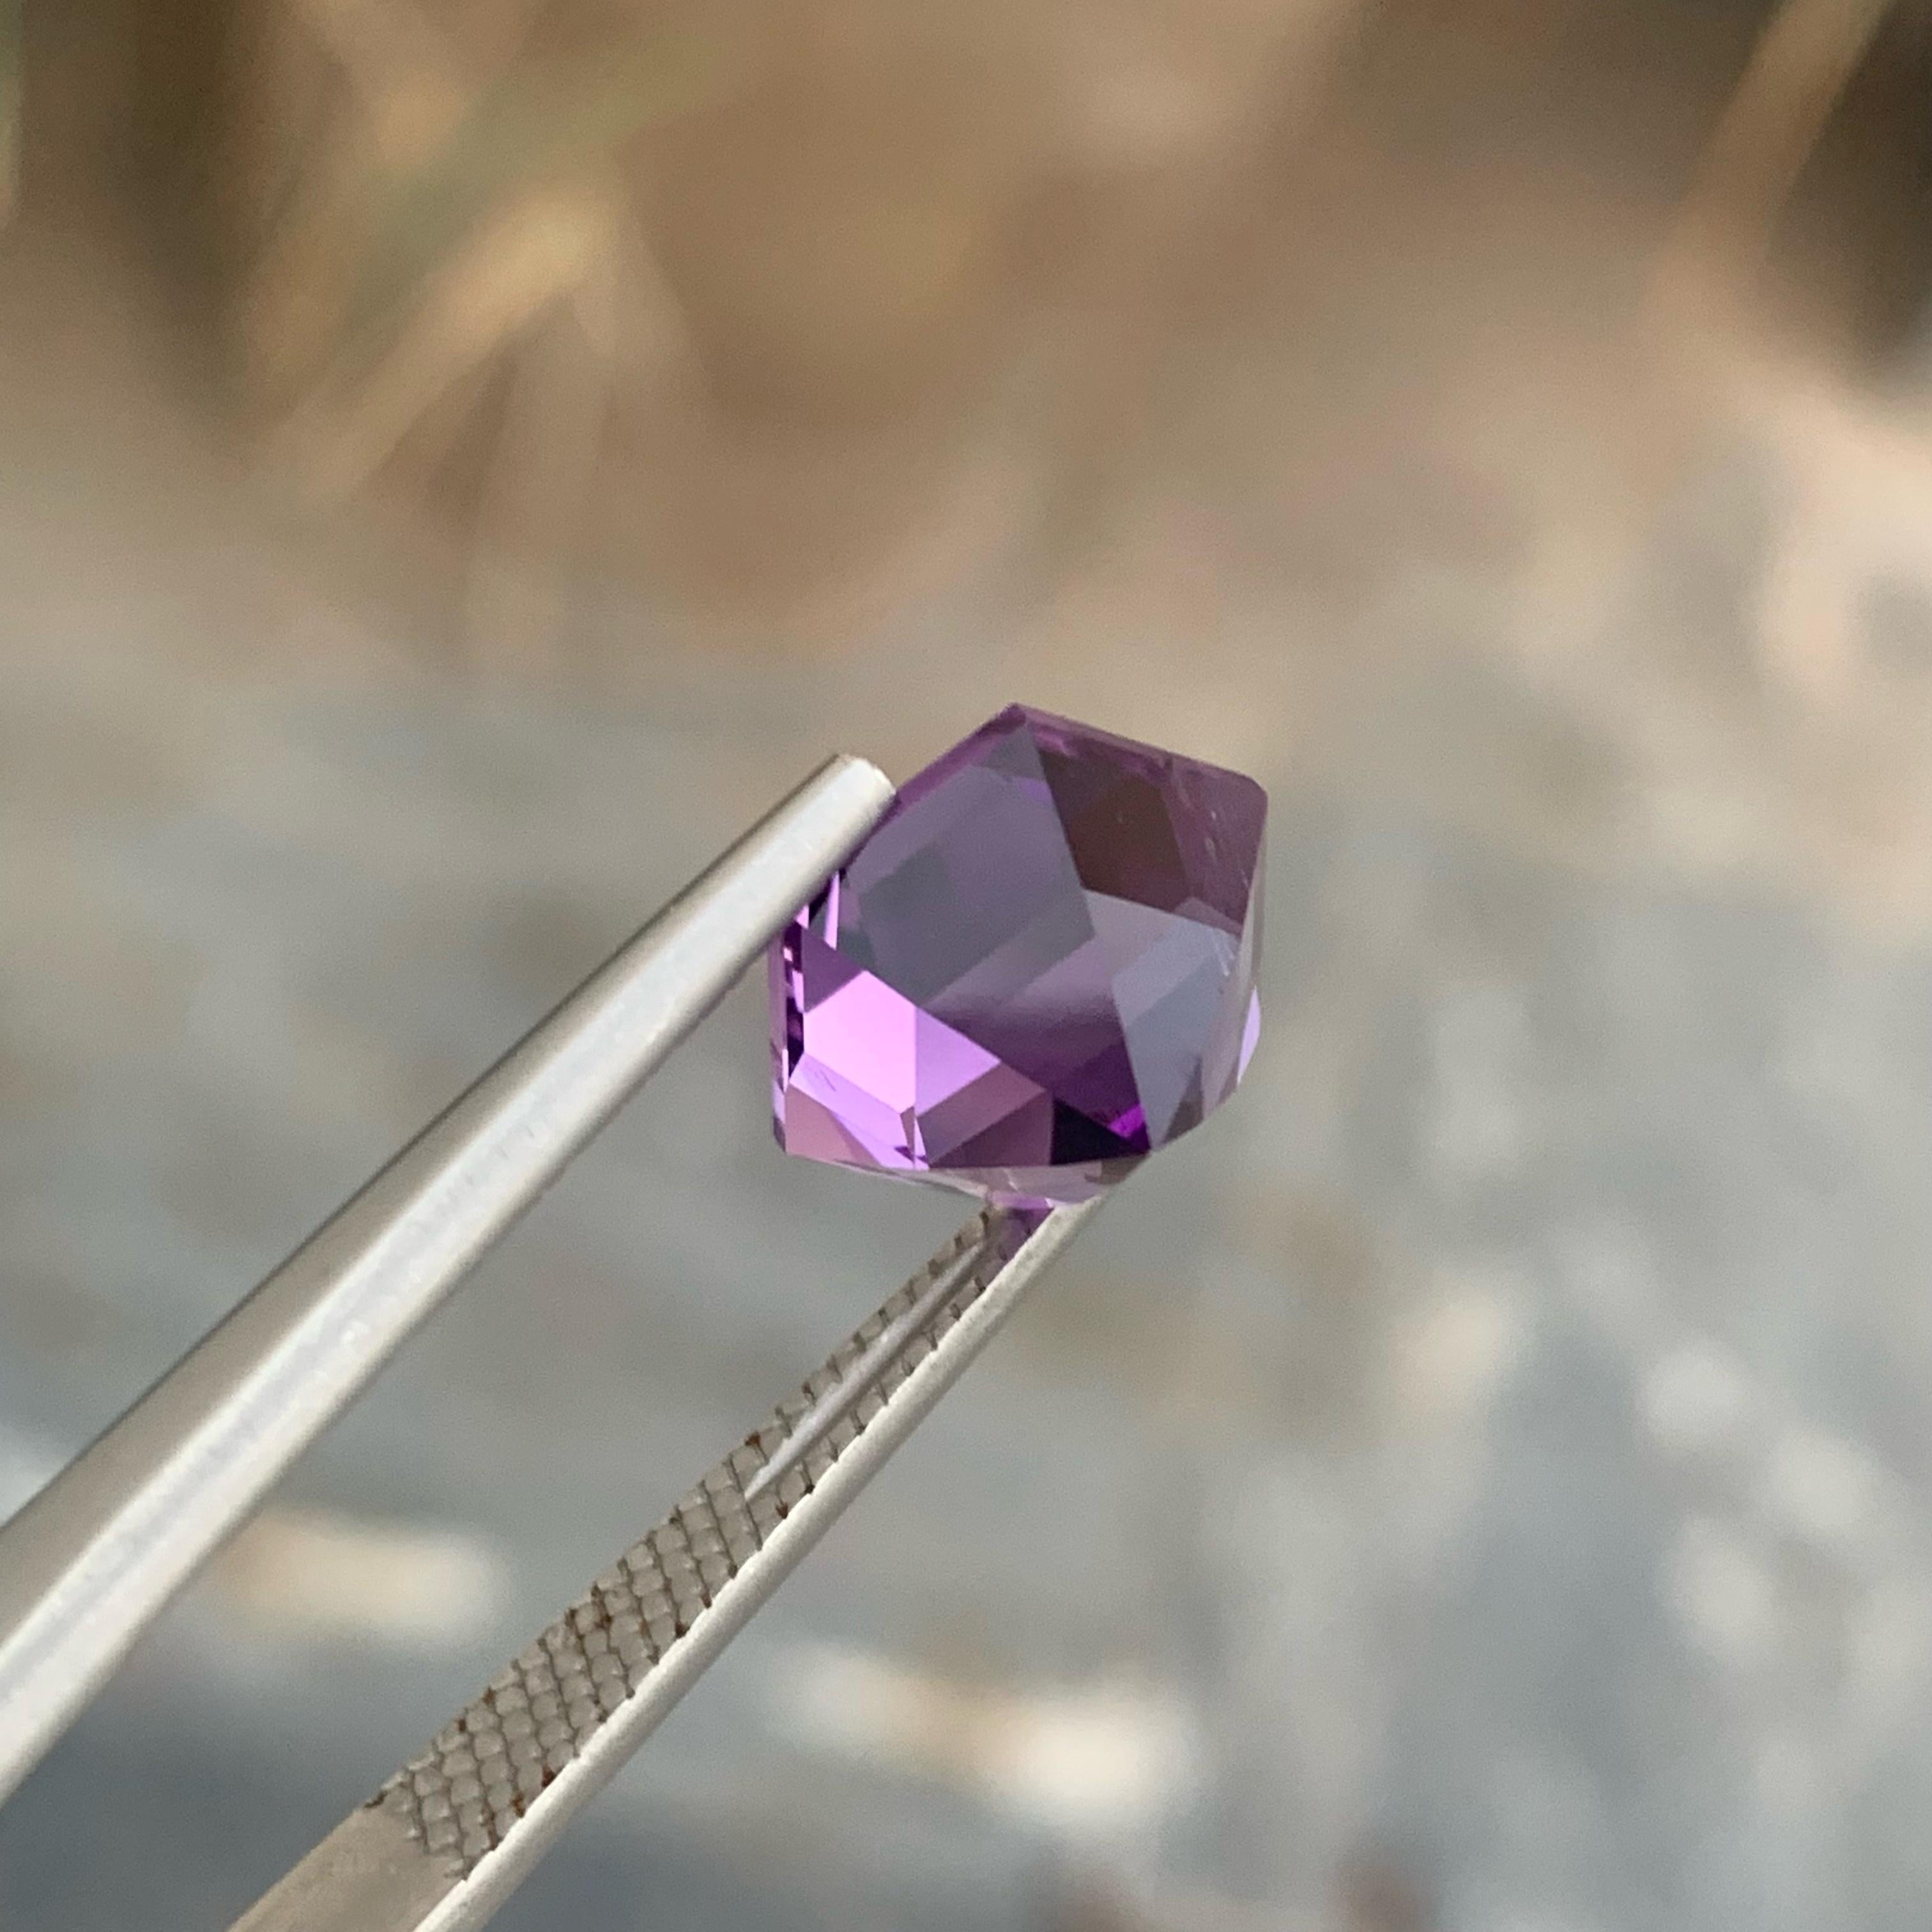 Weight 5.00 carats 
Dimensions 11.9 x 10.4 x 8.5 mm
Treatment None 
Origin Brazil 
Clarity Loupe Clean 
Shape Hexagon 
Cut Hexagonal 



Experience the enchanting beauty of our Hexagonal Cut Amethyst, a stunning 5.00 carat gemstone sourced from the